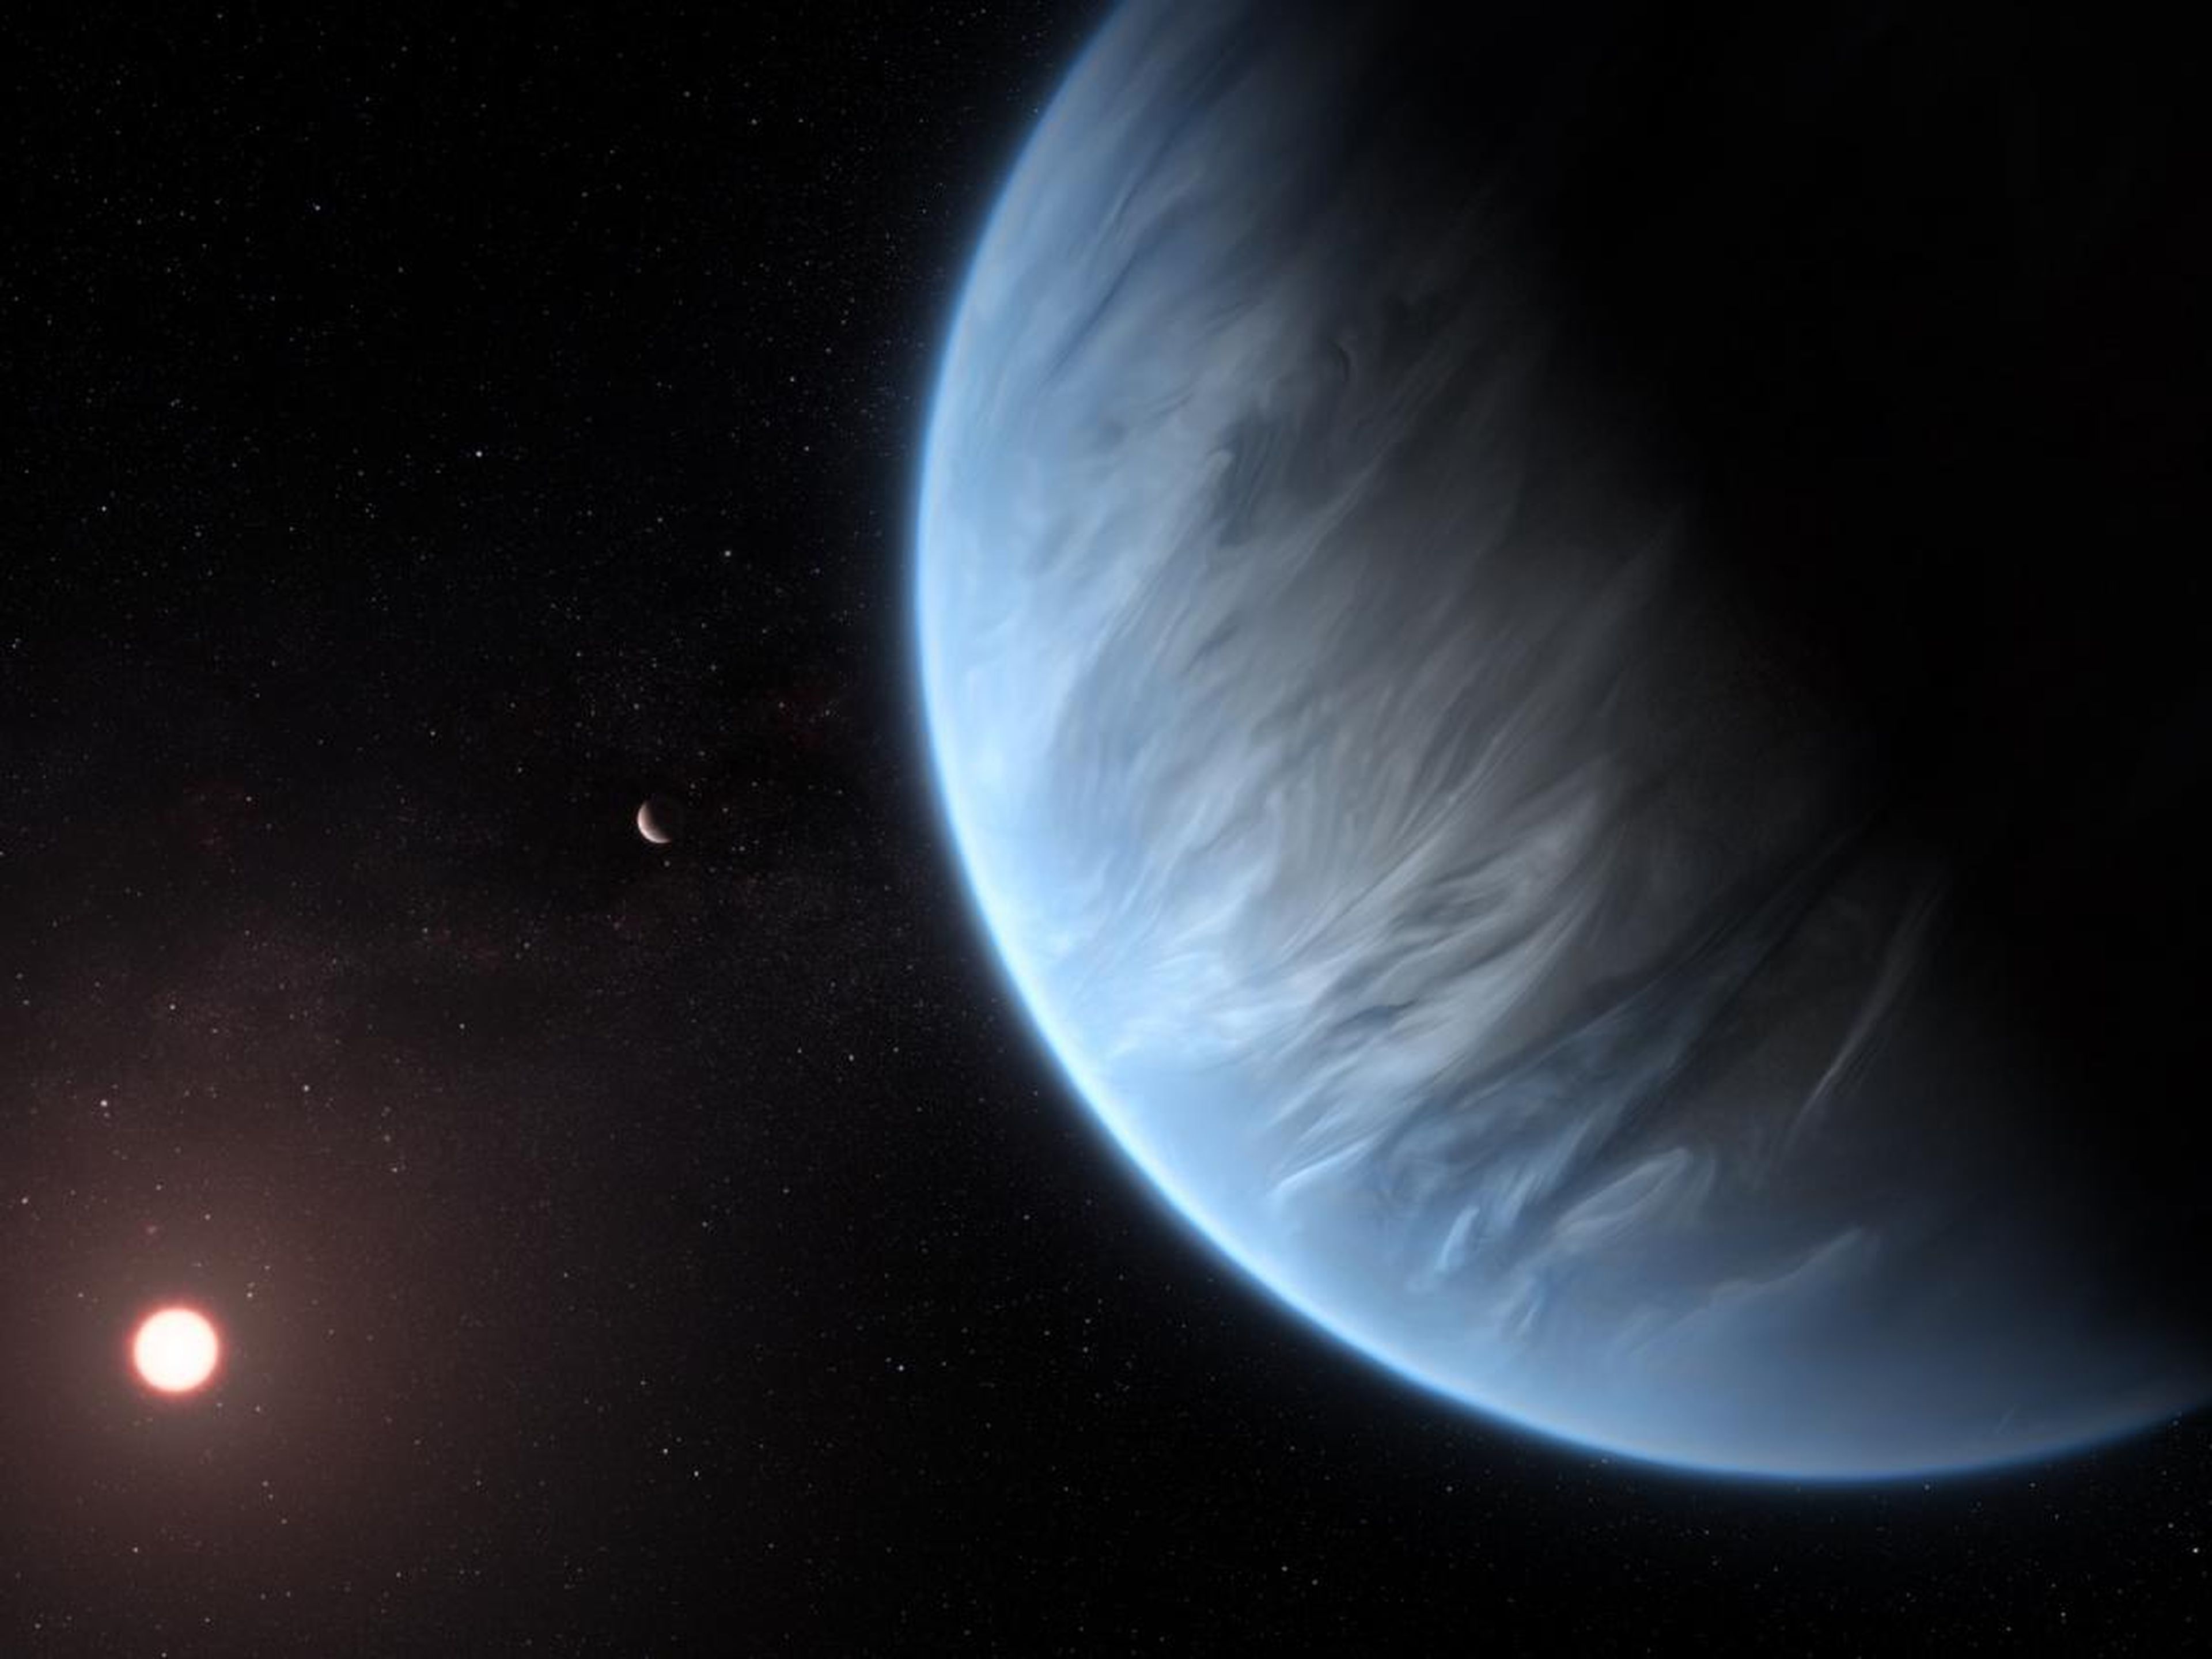 This artist's impression shows the planet K2-18b, its host star, and an accompanying planet in this system. K2-18b is now the only super-Earth exoplanet known to host both water and temperatures that could support life.